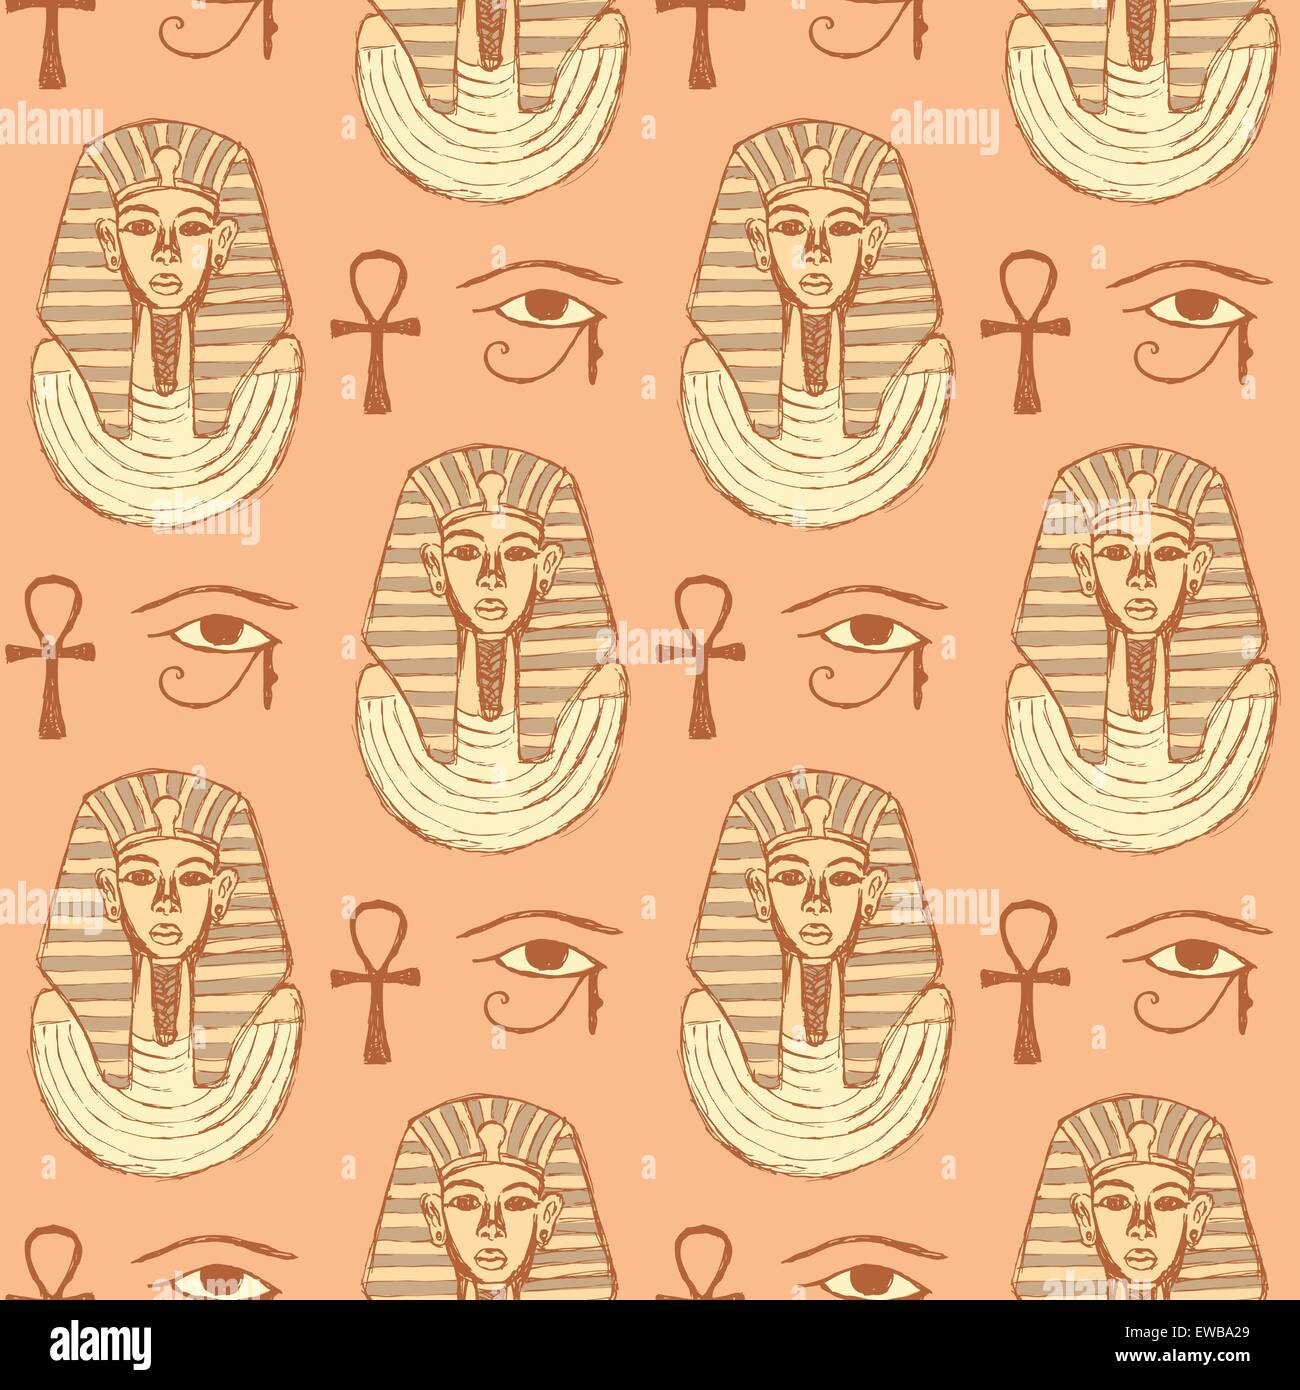 Sketch Egyptian symbols in vintage style, vector seamless pattern Stock Vector